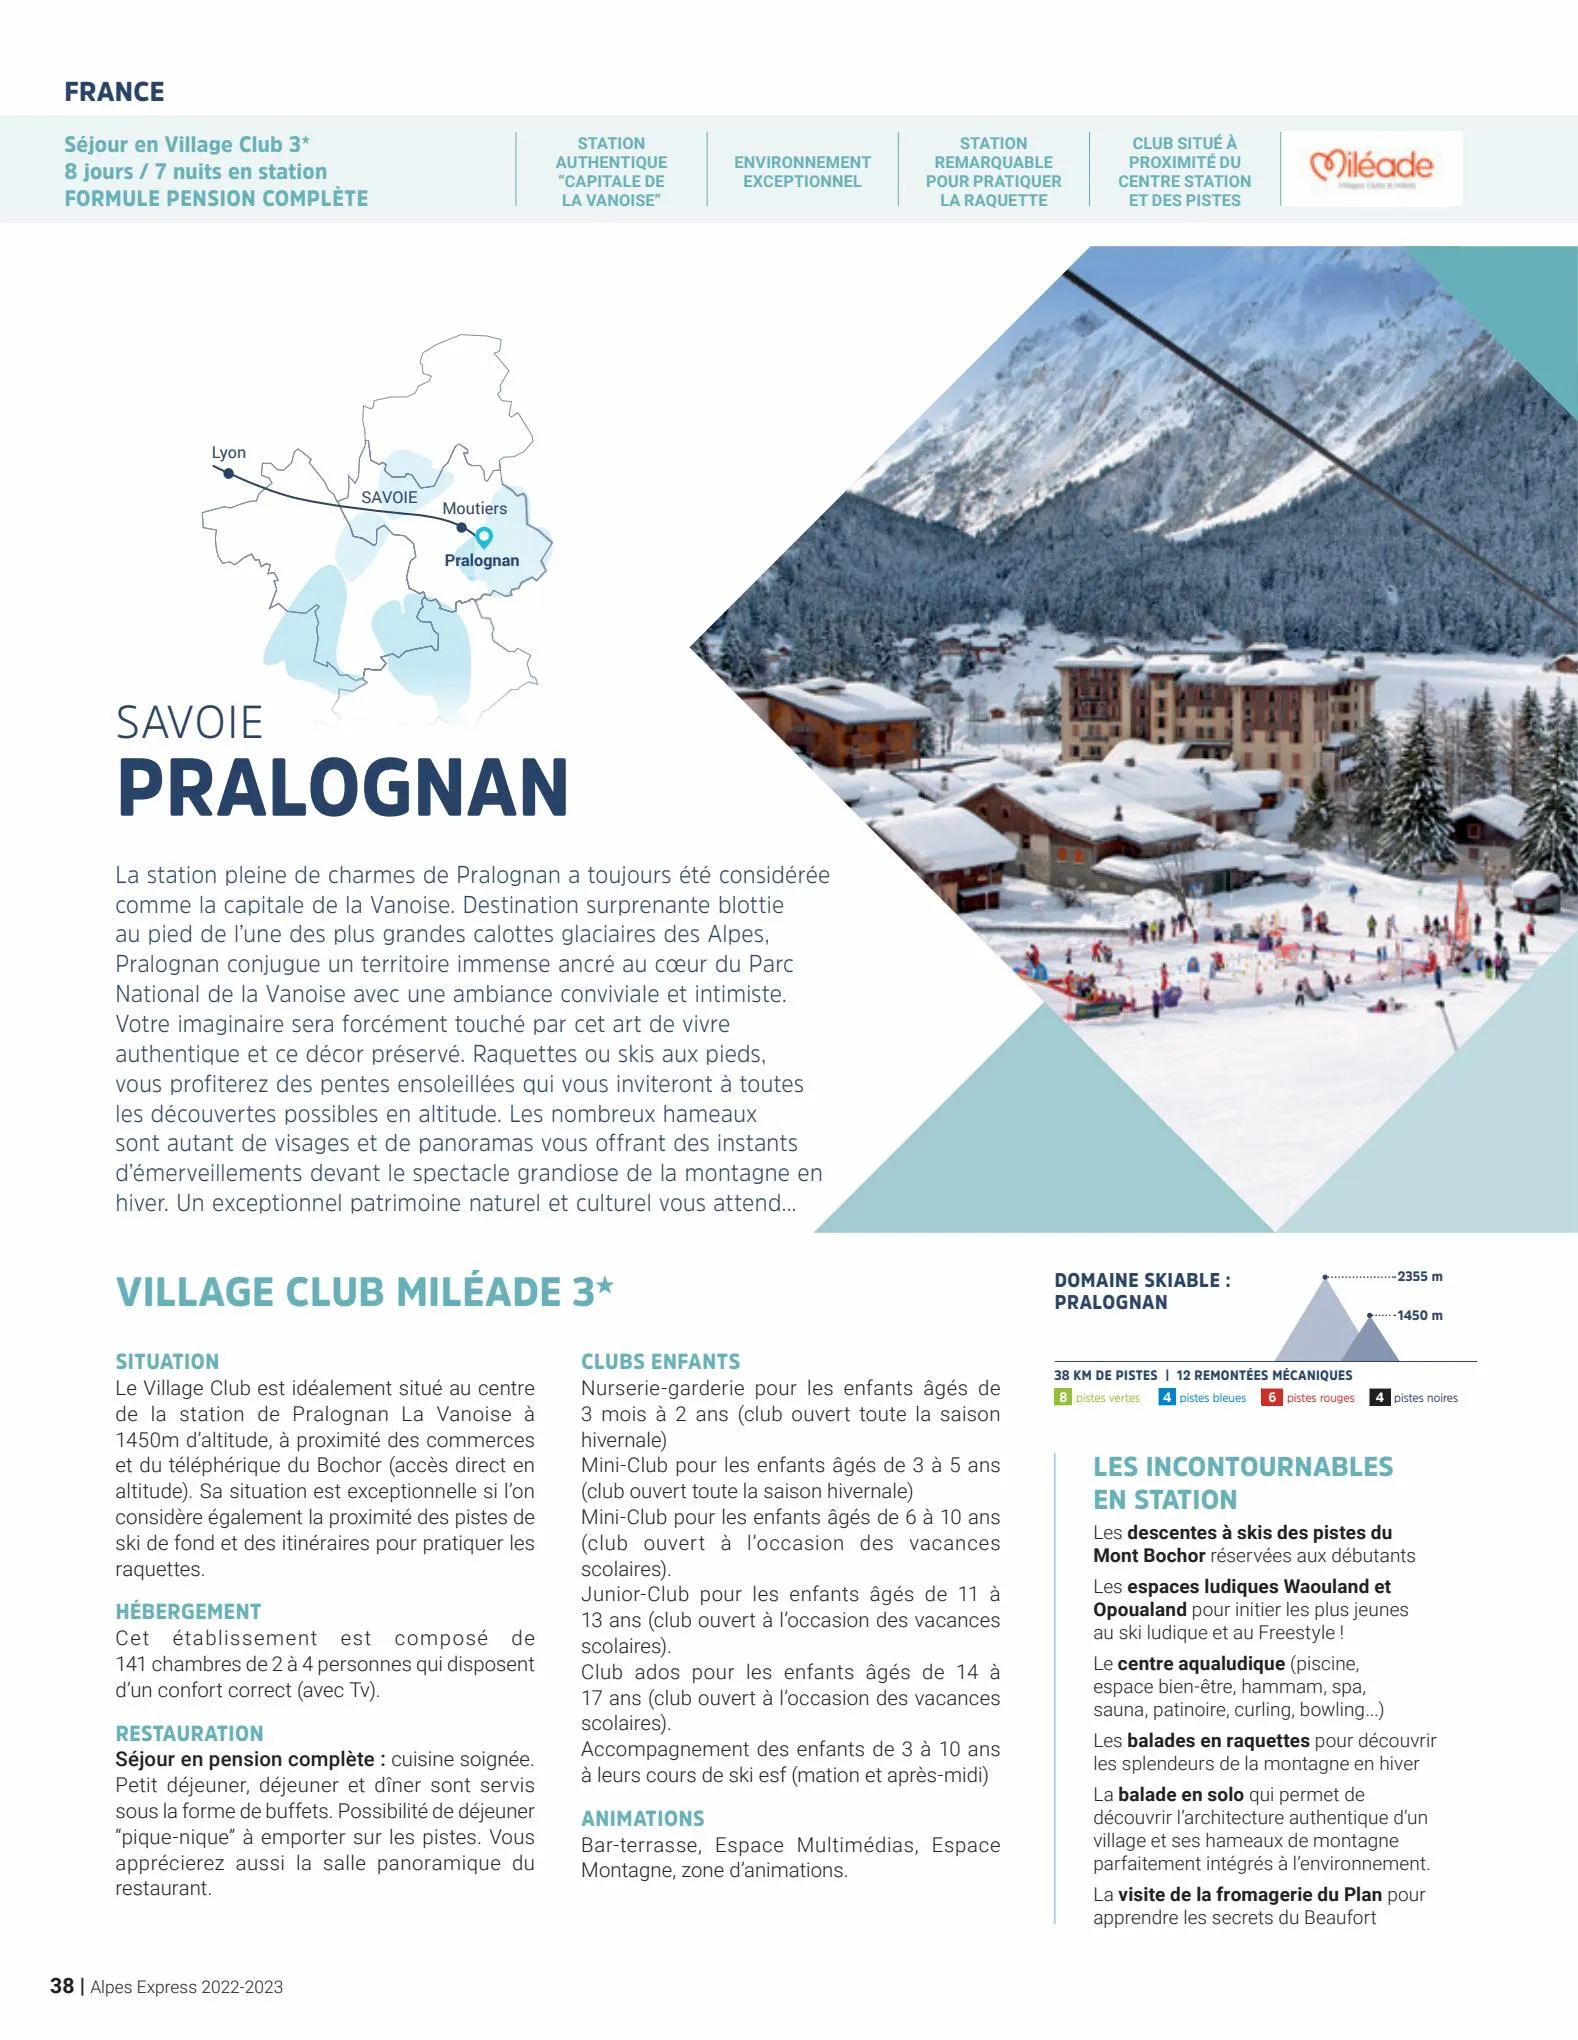 Catalogue Alpes Express - Hiver 2022-2023, page 00038